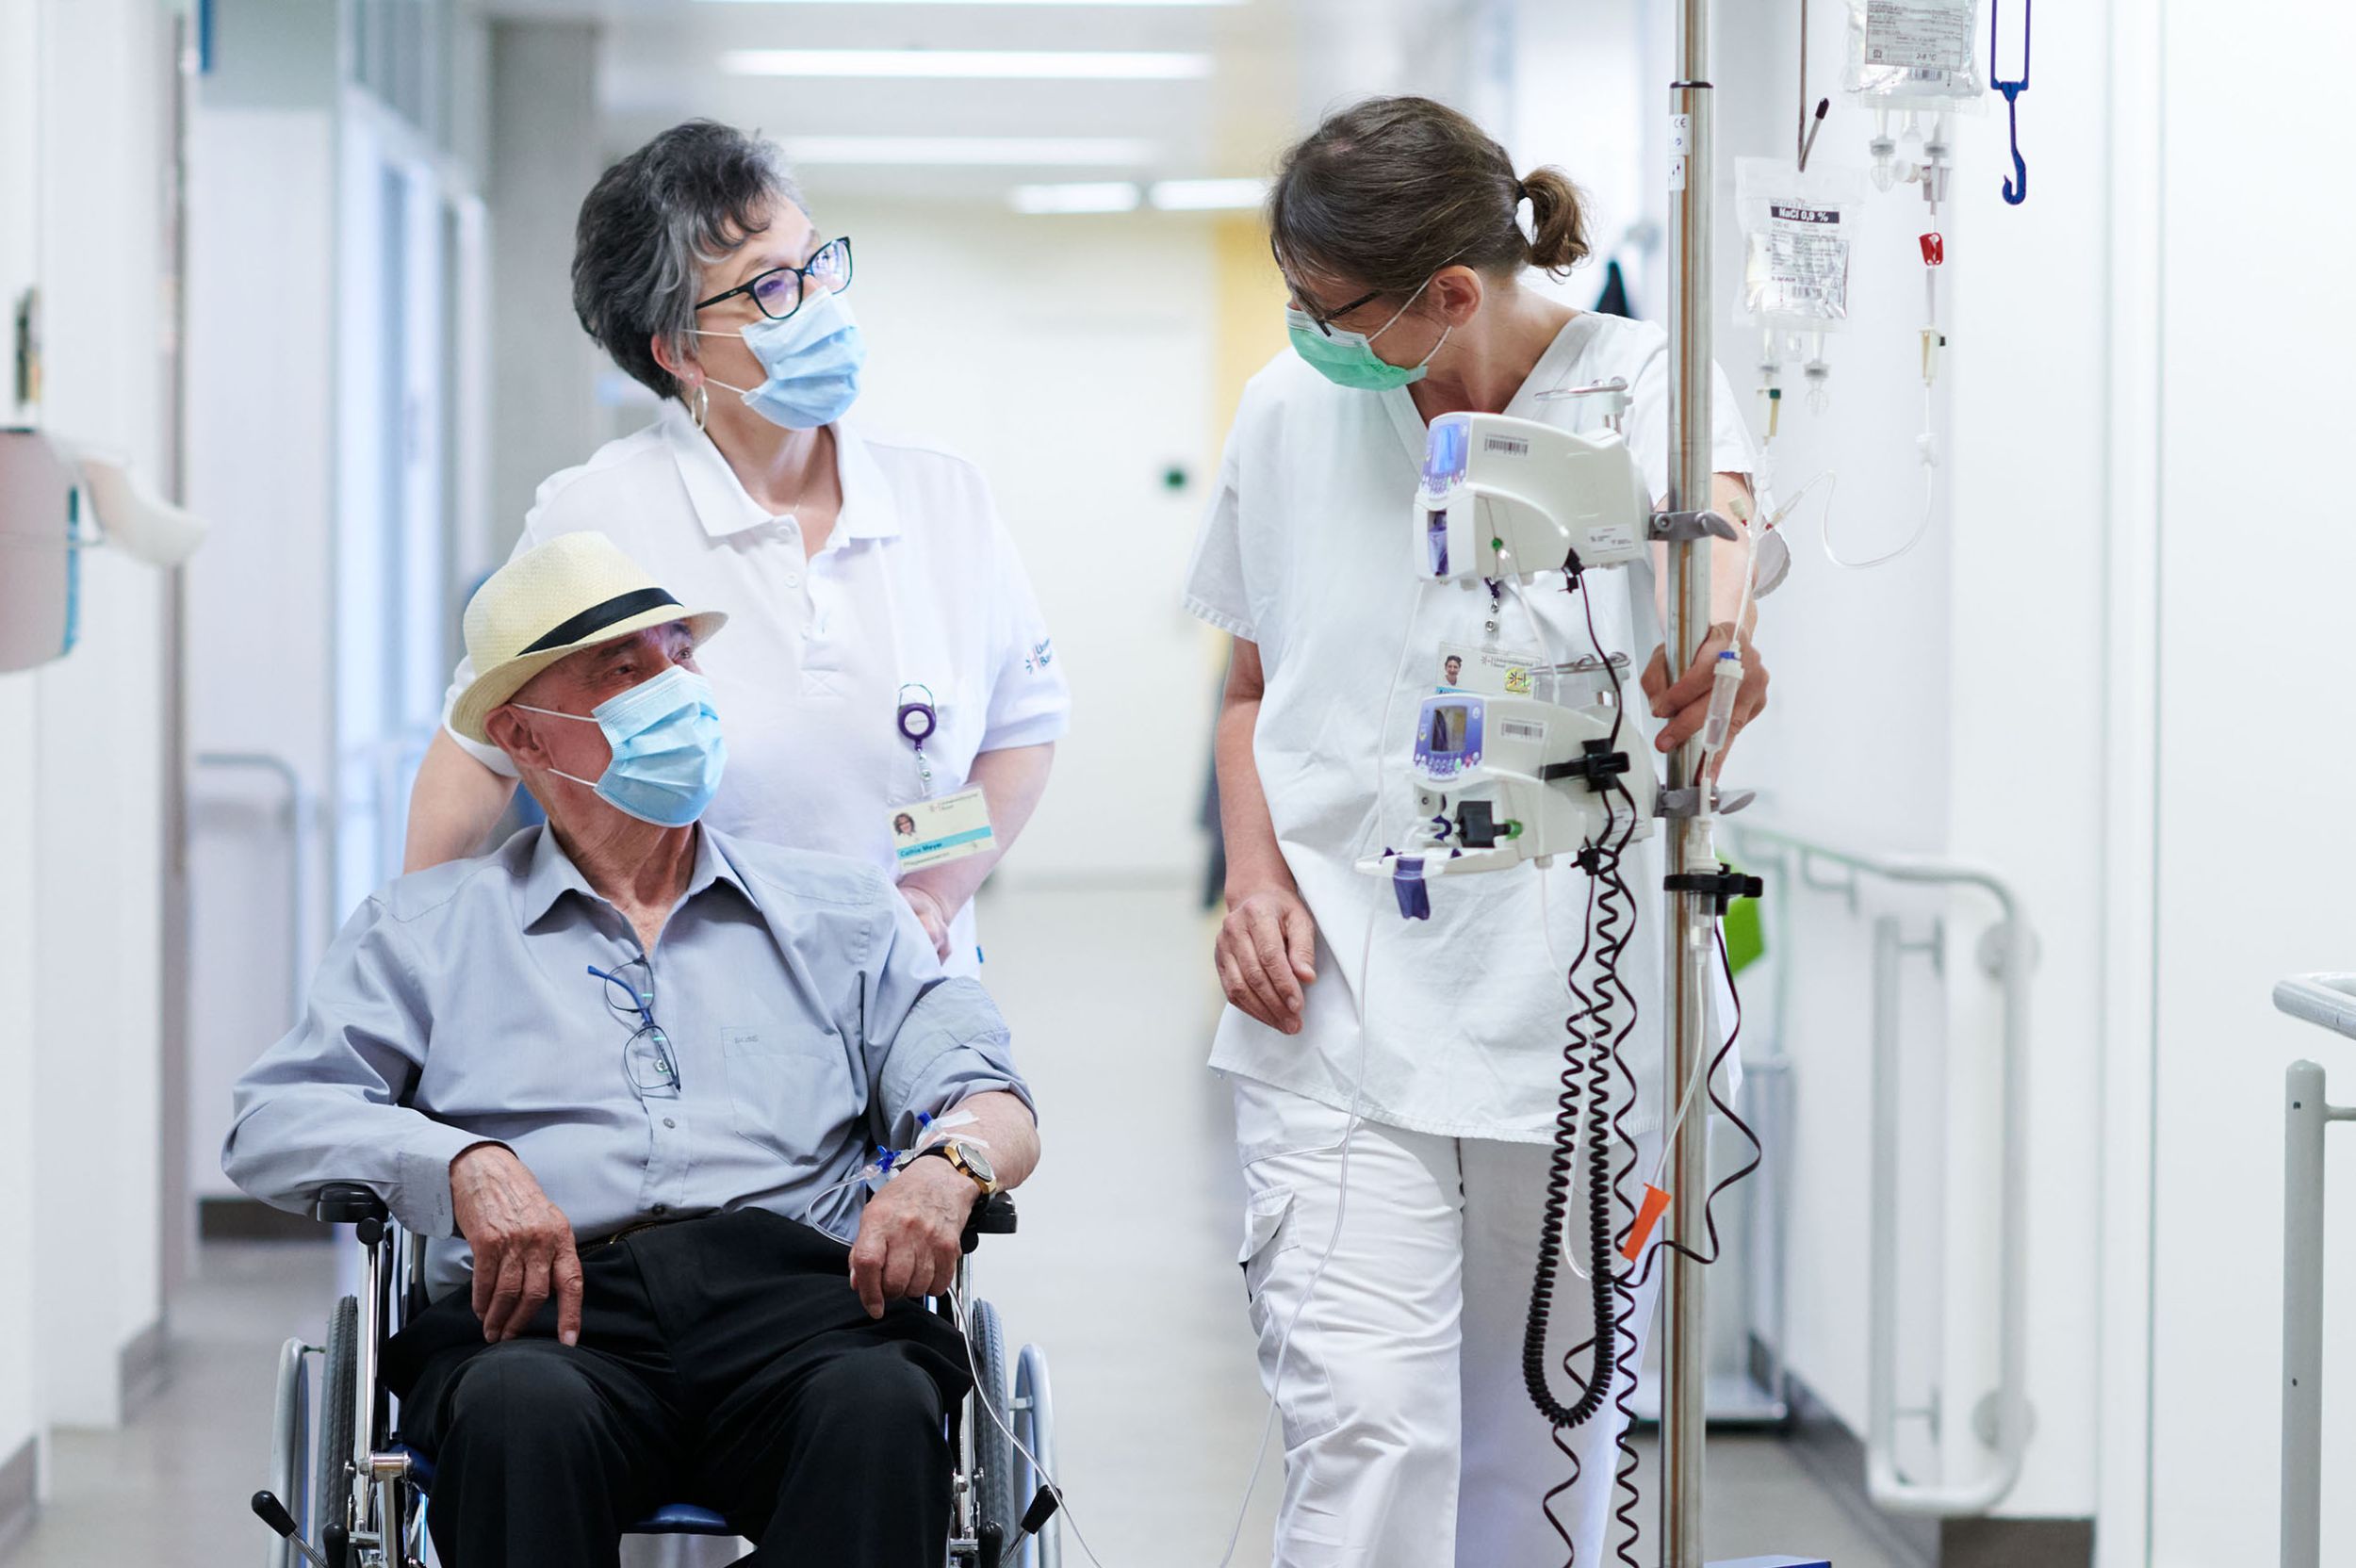 A man in a wheelchair, cared for by two nurses